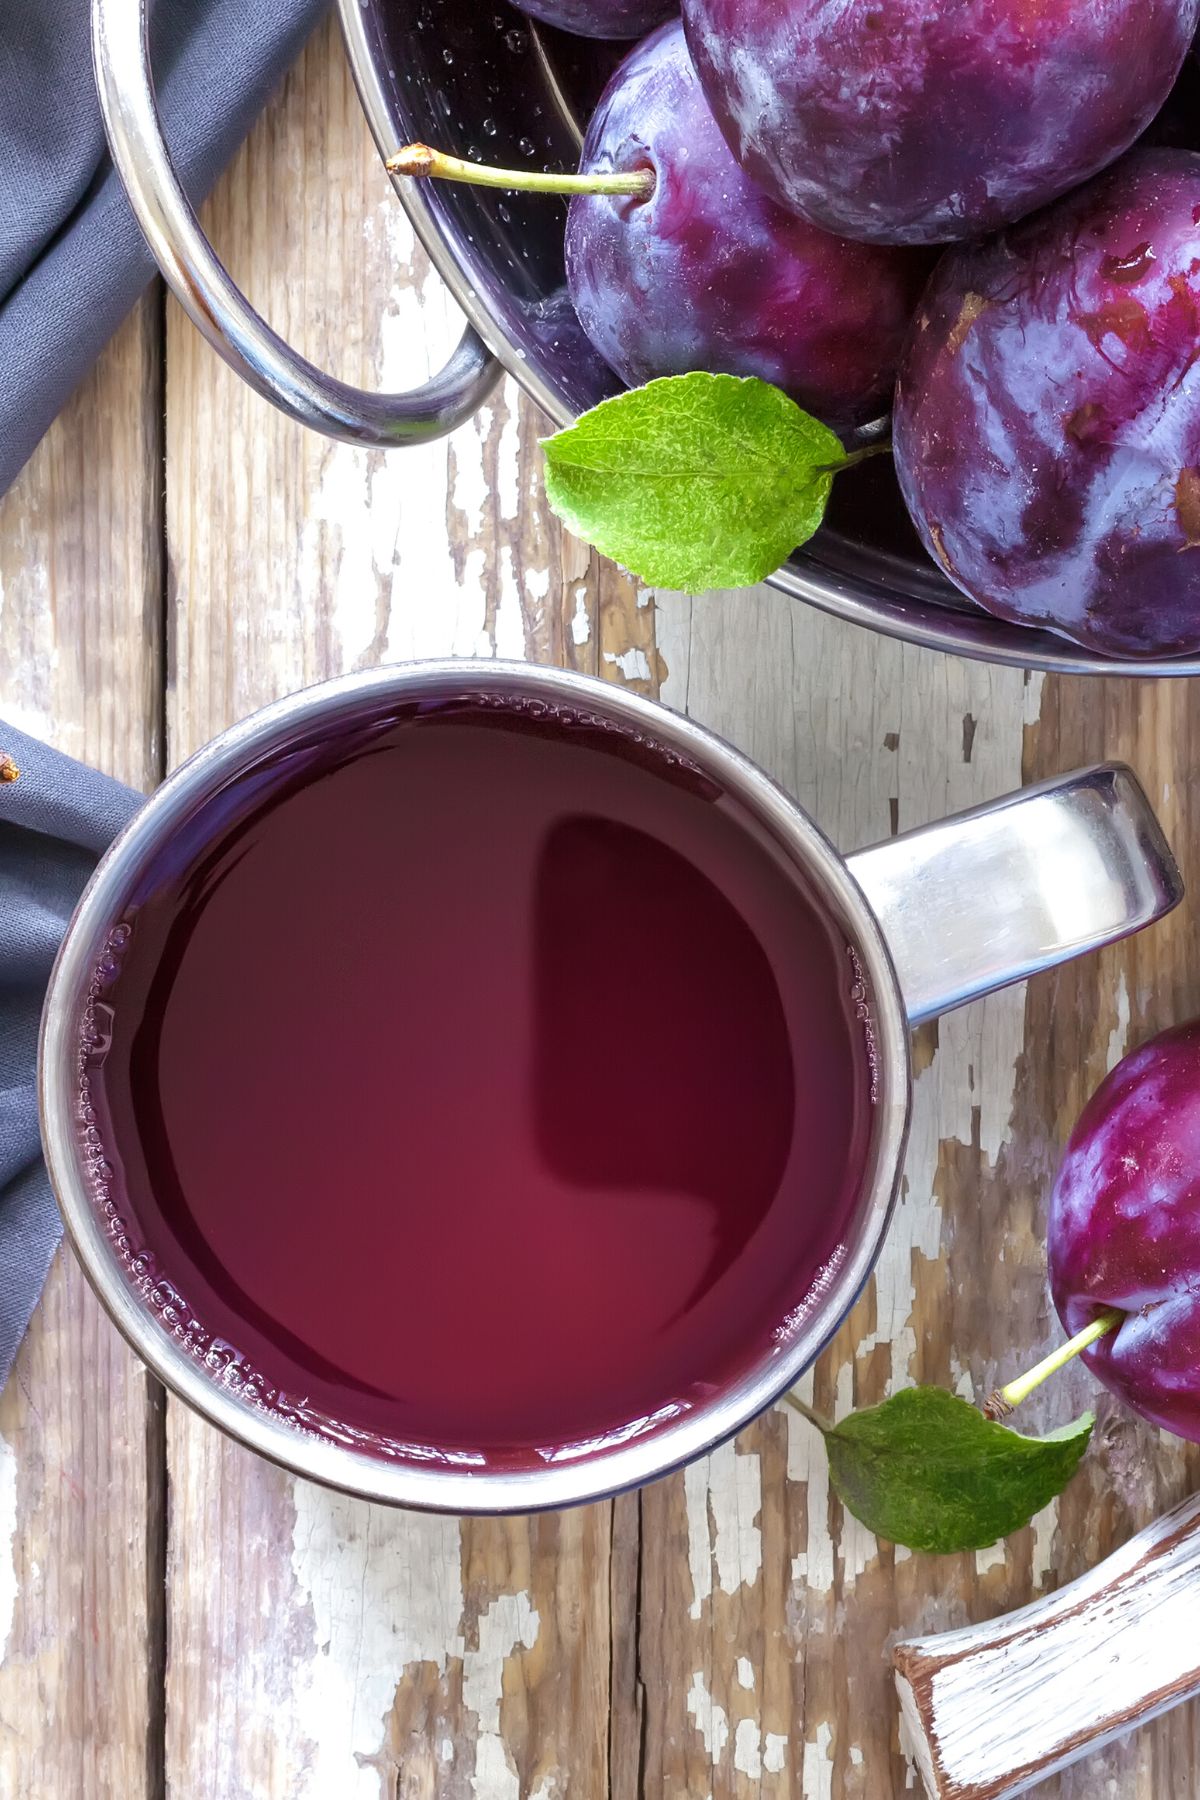 Top view of a silver mug filled with fresh plum juice.